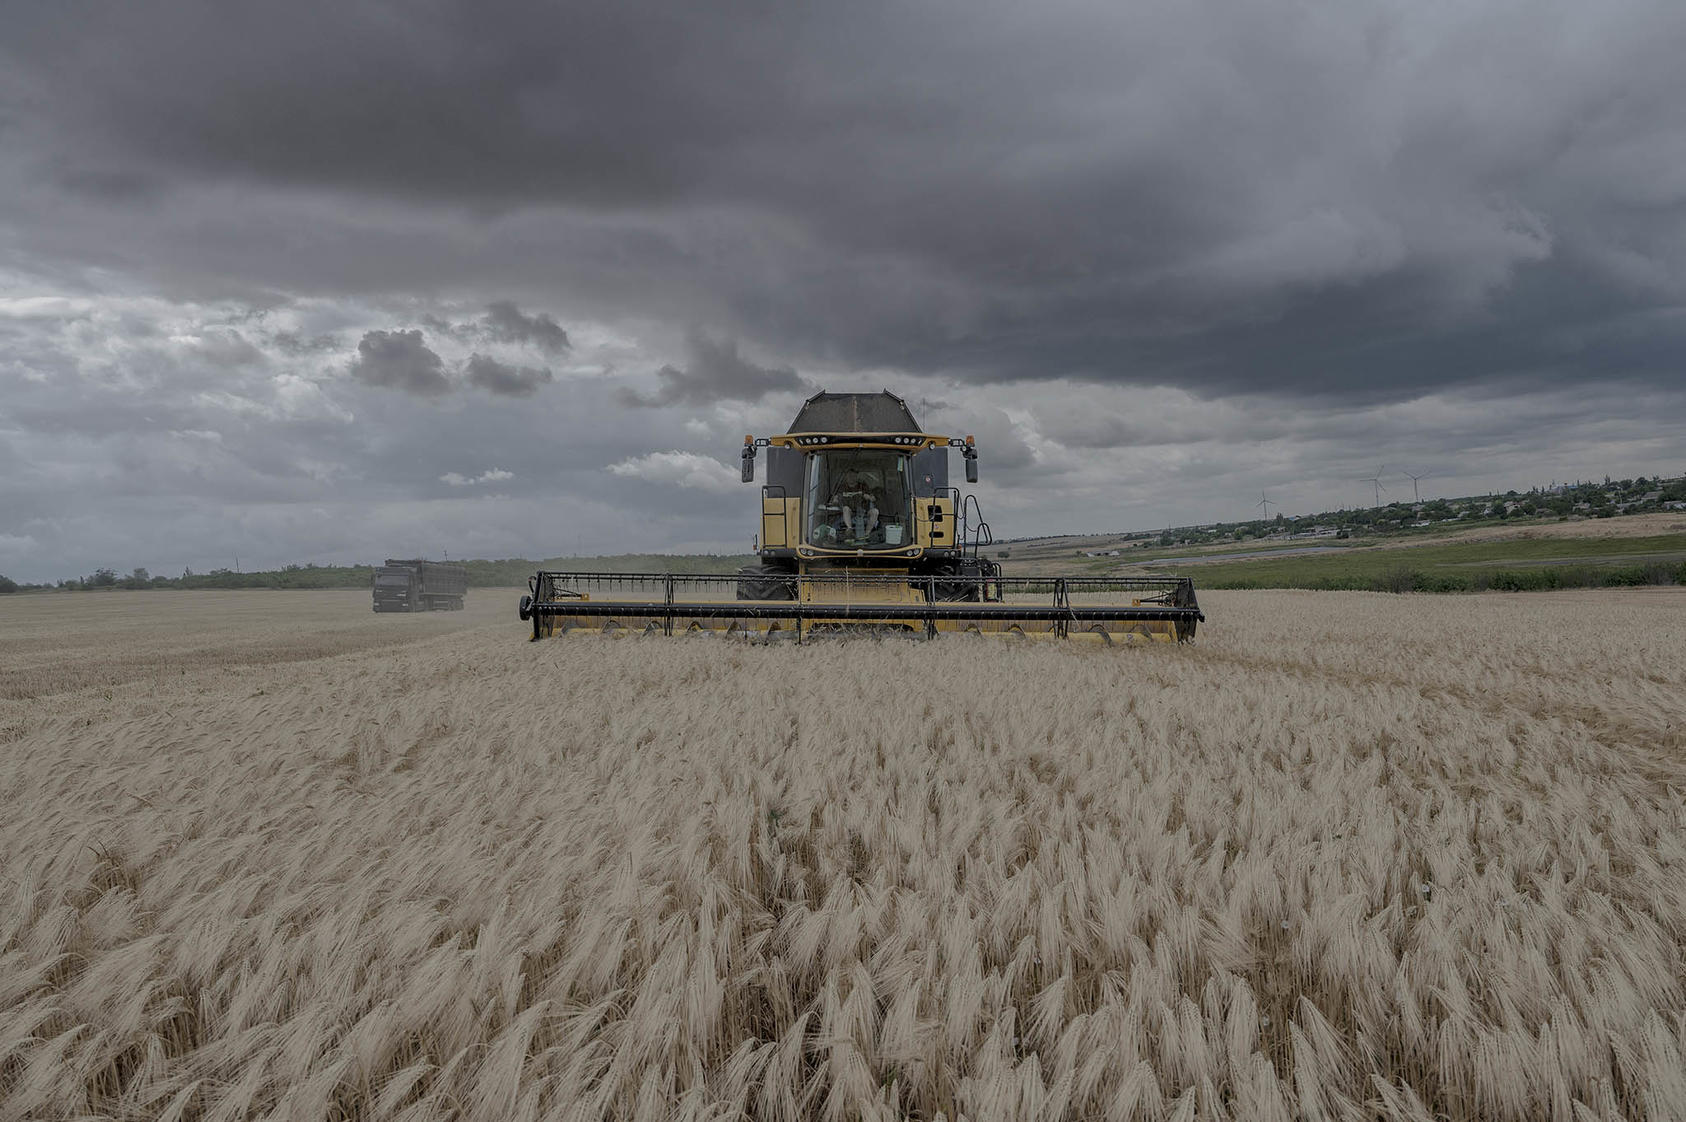 Farming machinery in the Mykolaiv region, Ukraine, June 30, 2022. As Ukraine looks to build partnerships in Africa, its top diplomat has emphasized that Kyiv is prepared to help the continent address food insecurity. (Laetitia Vancon/The New York Times)